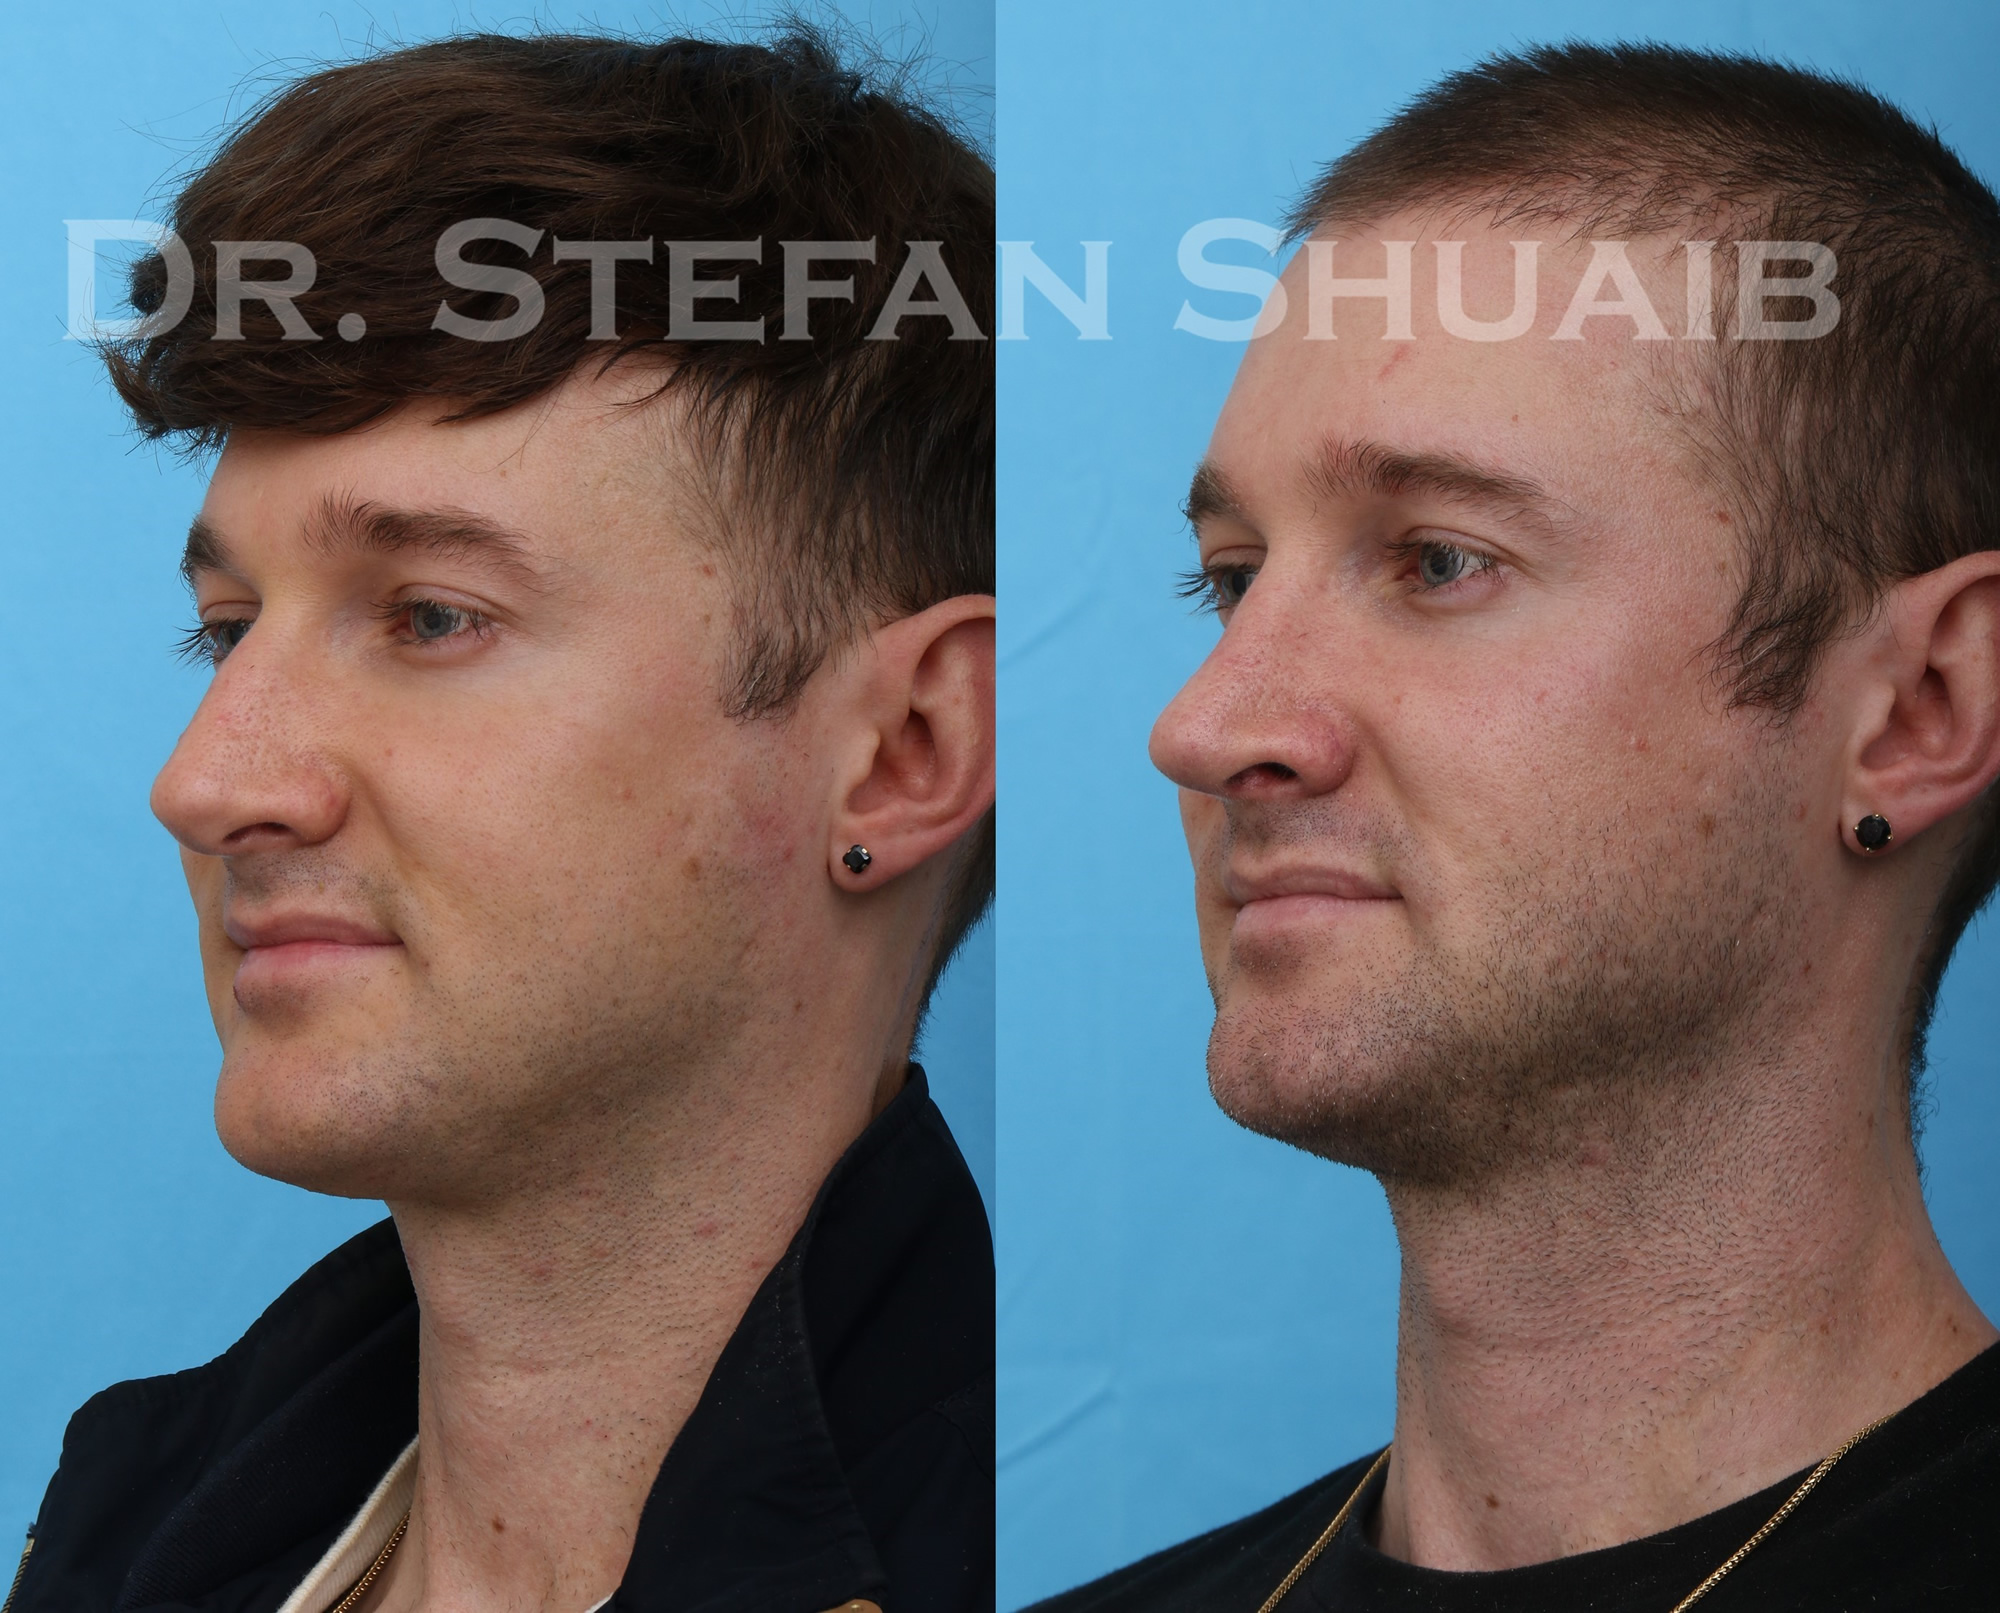 male patient before and after rhinoplasty procedure